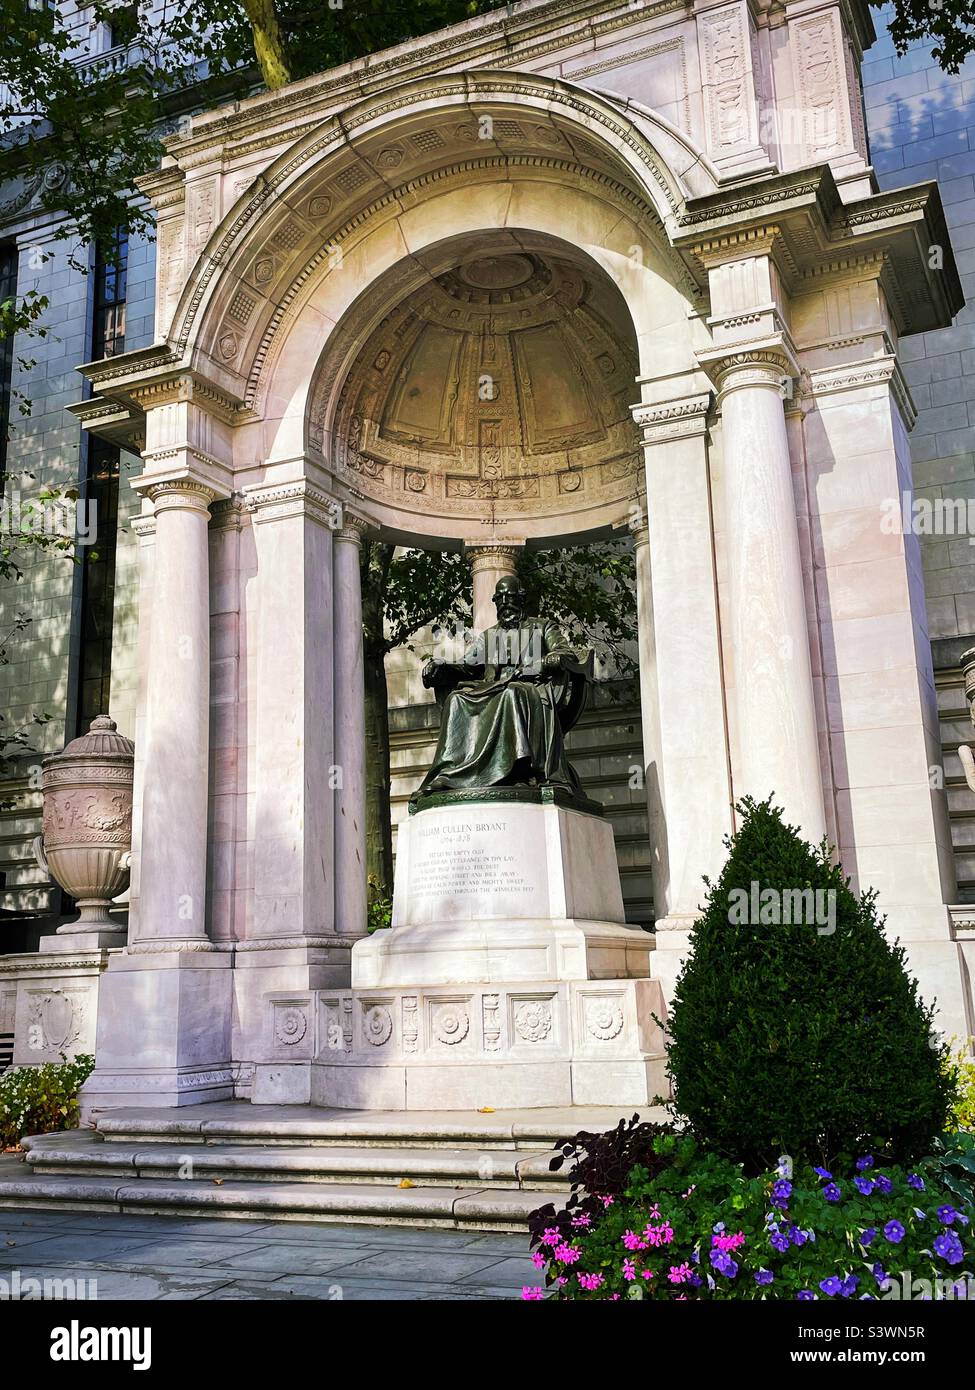 The statue of William Cullen Bryant is in the park named after him Bryant Park, 2022, New York City, USA Stock Photo